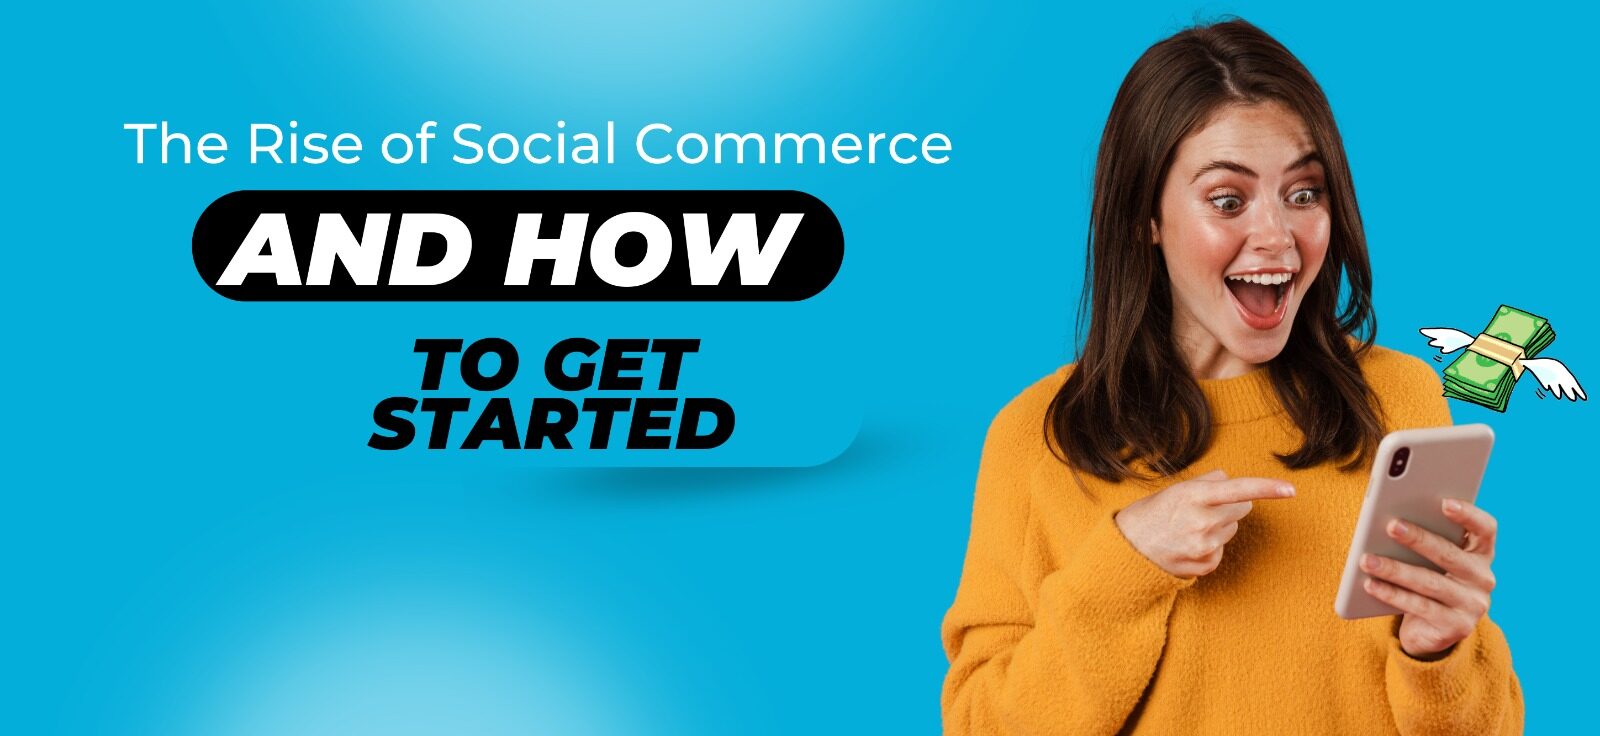 The Rise of Social Commerce and How to Get Started